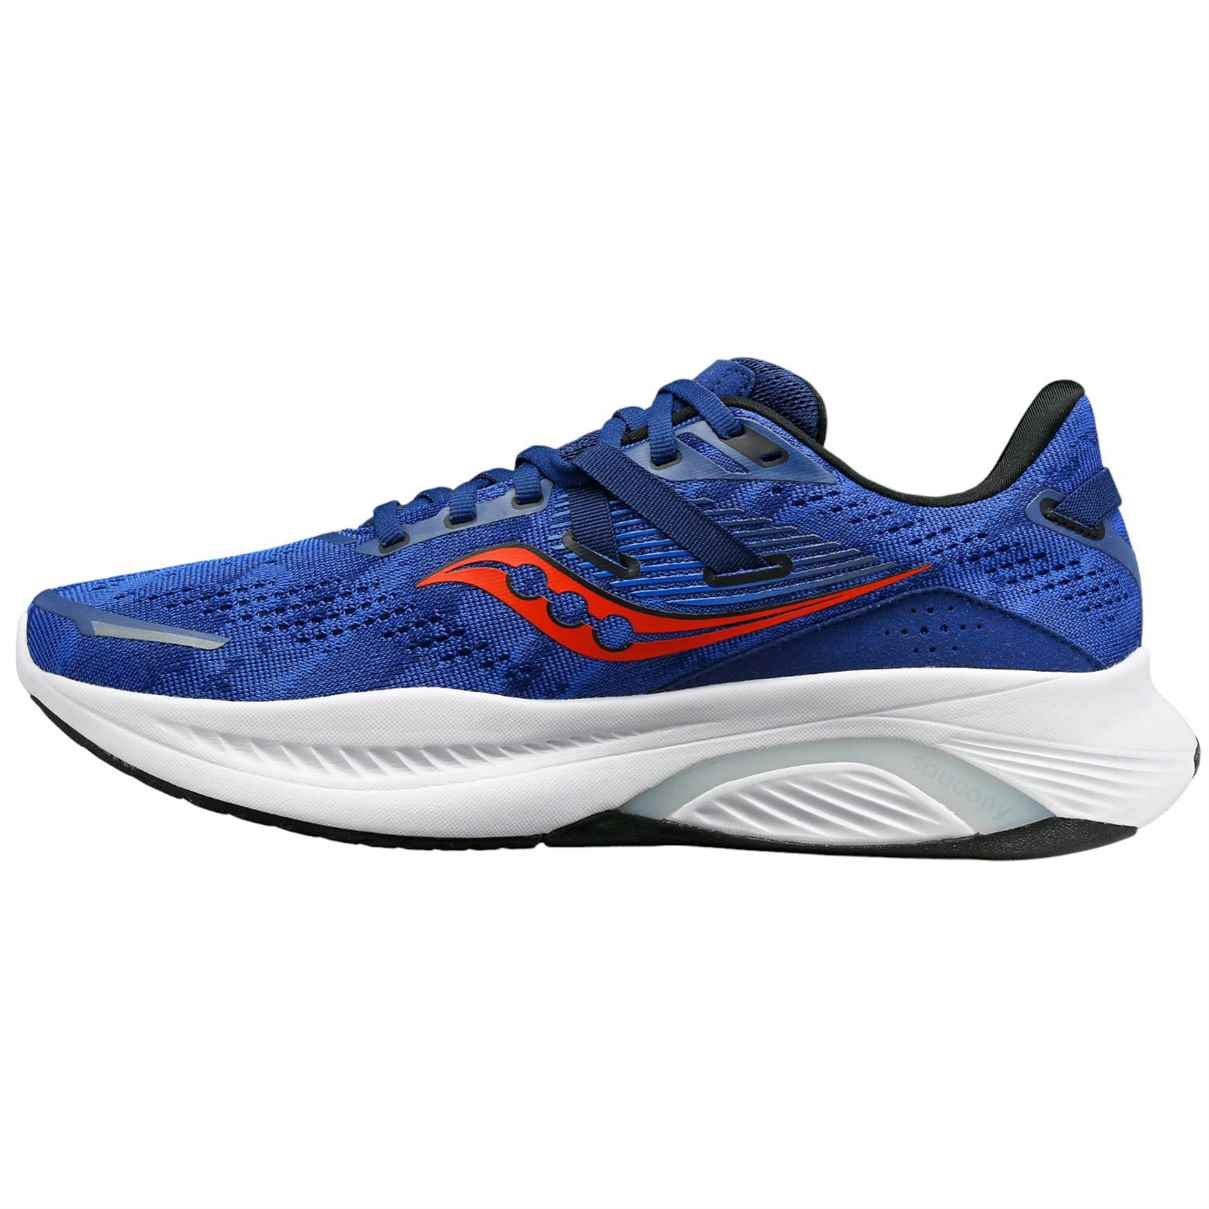 SAUCONY GUIDE 16 MENS RUNNING SHOES